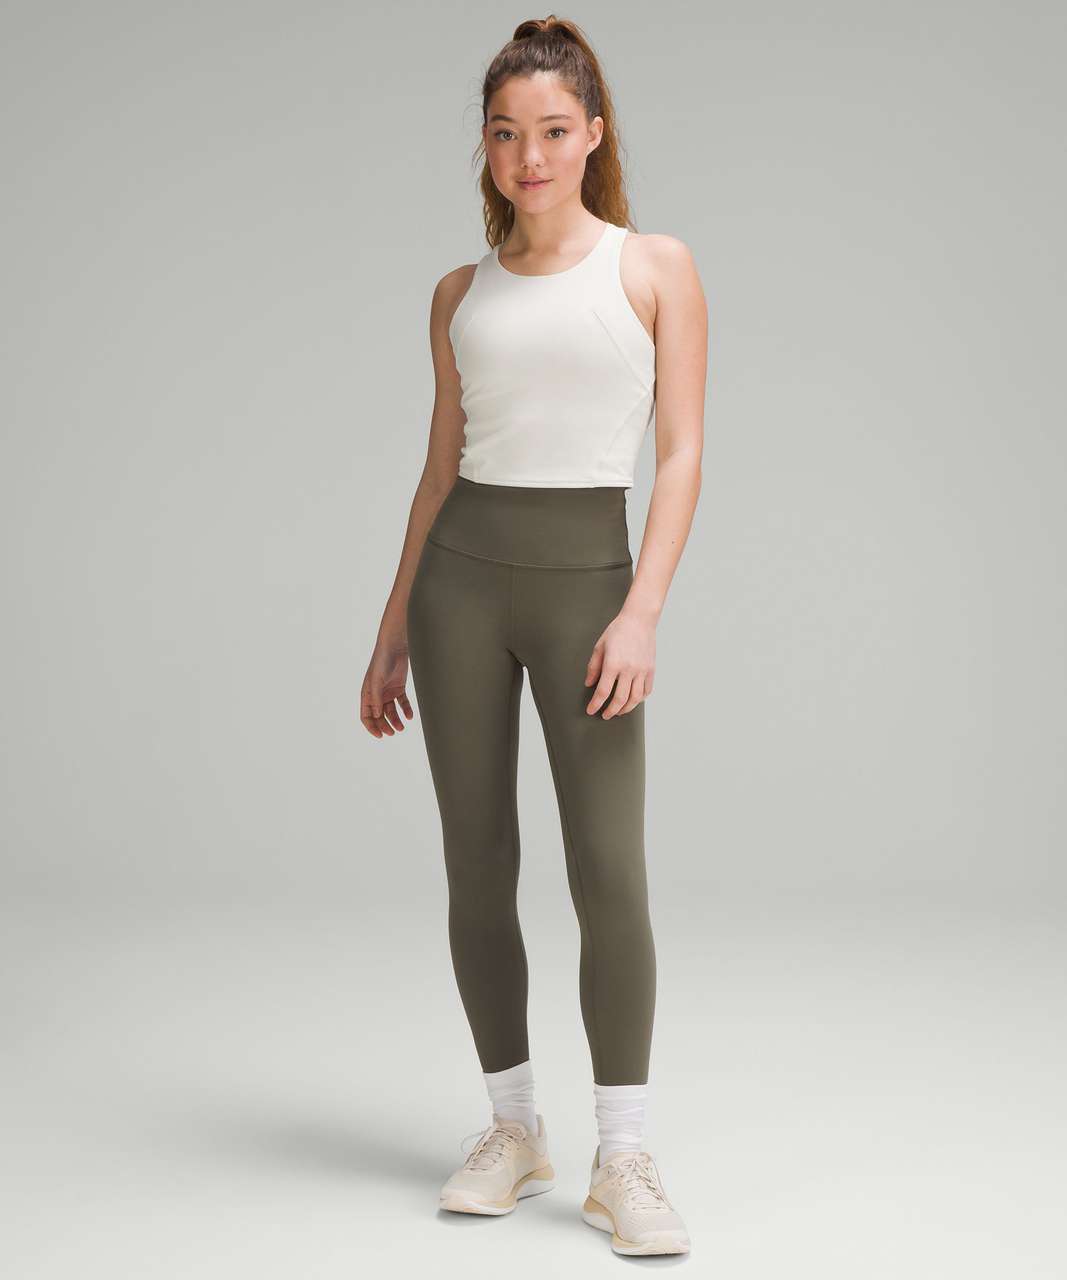 Lululemon Workout Top With Built In Brakes